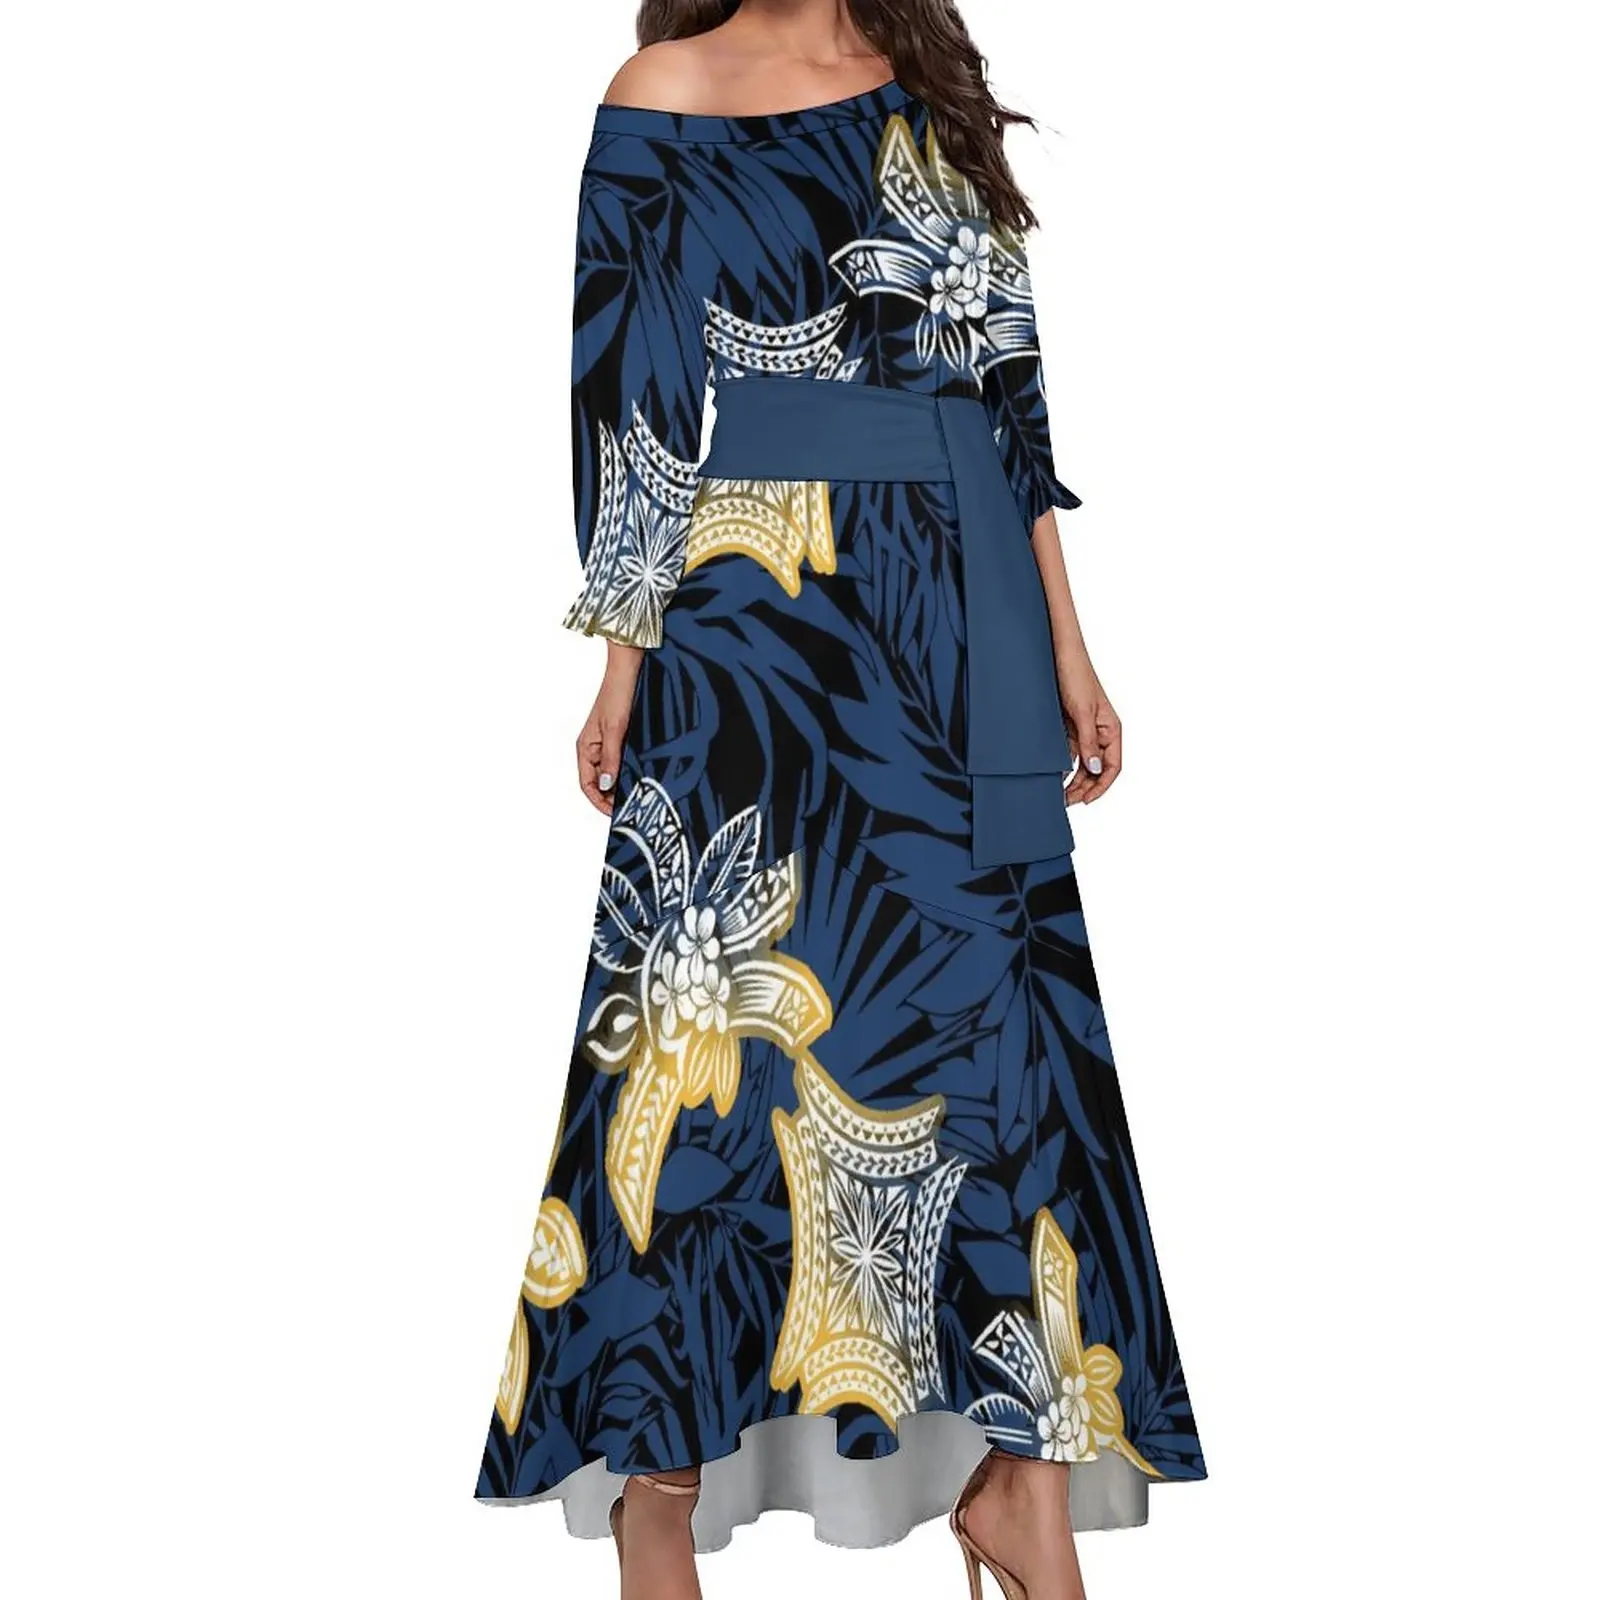 pacific island tropical floral print mermaid dress for party polynesian tribal design sexy off shoulder women long dress